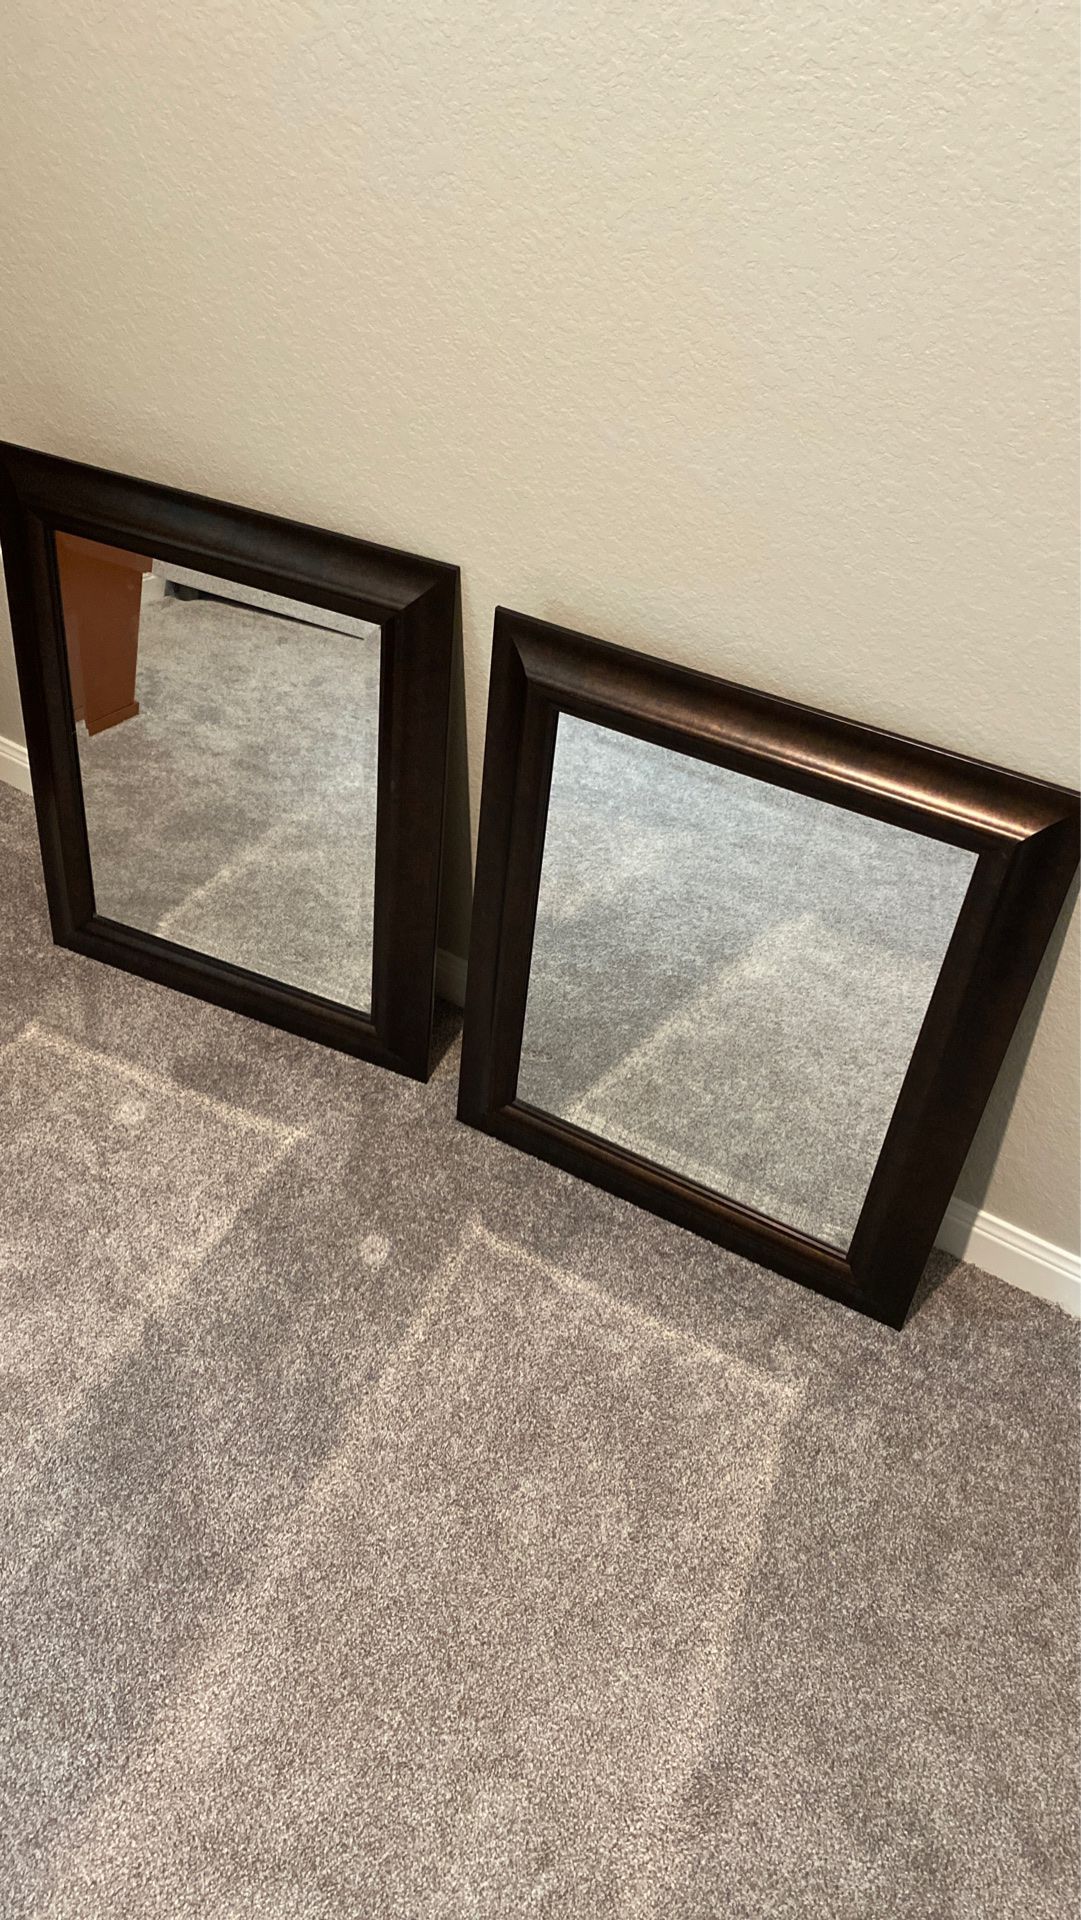 Double very nice wall hanging mirrors - like new